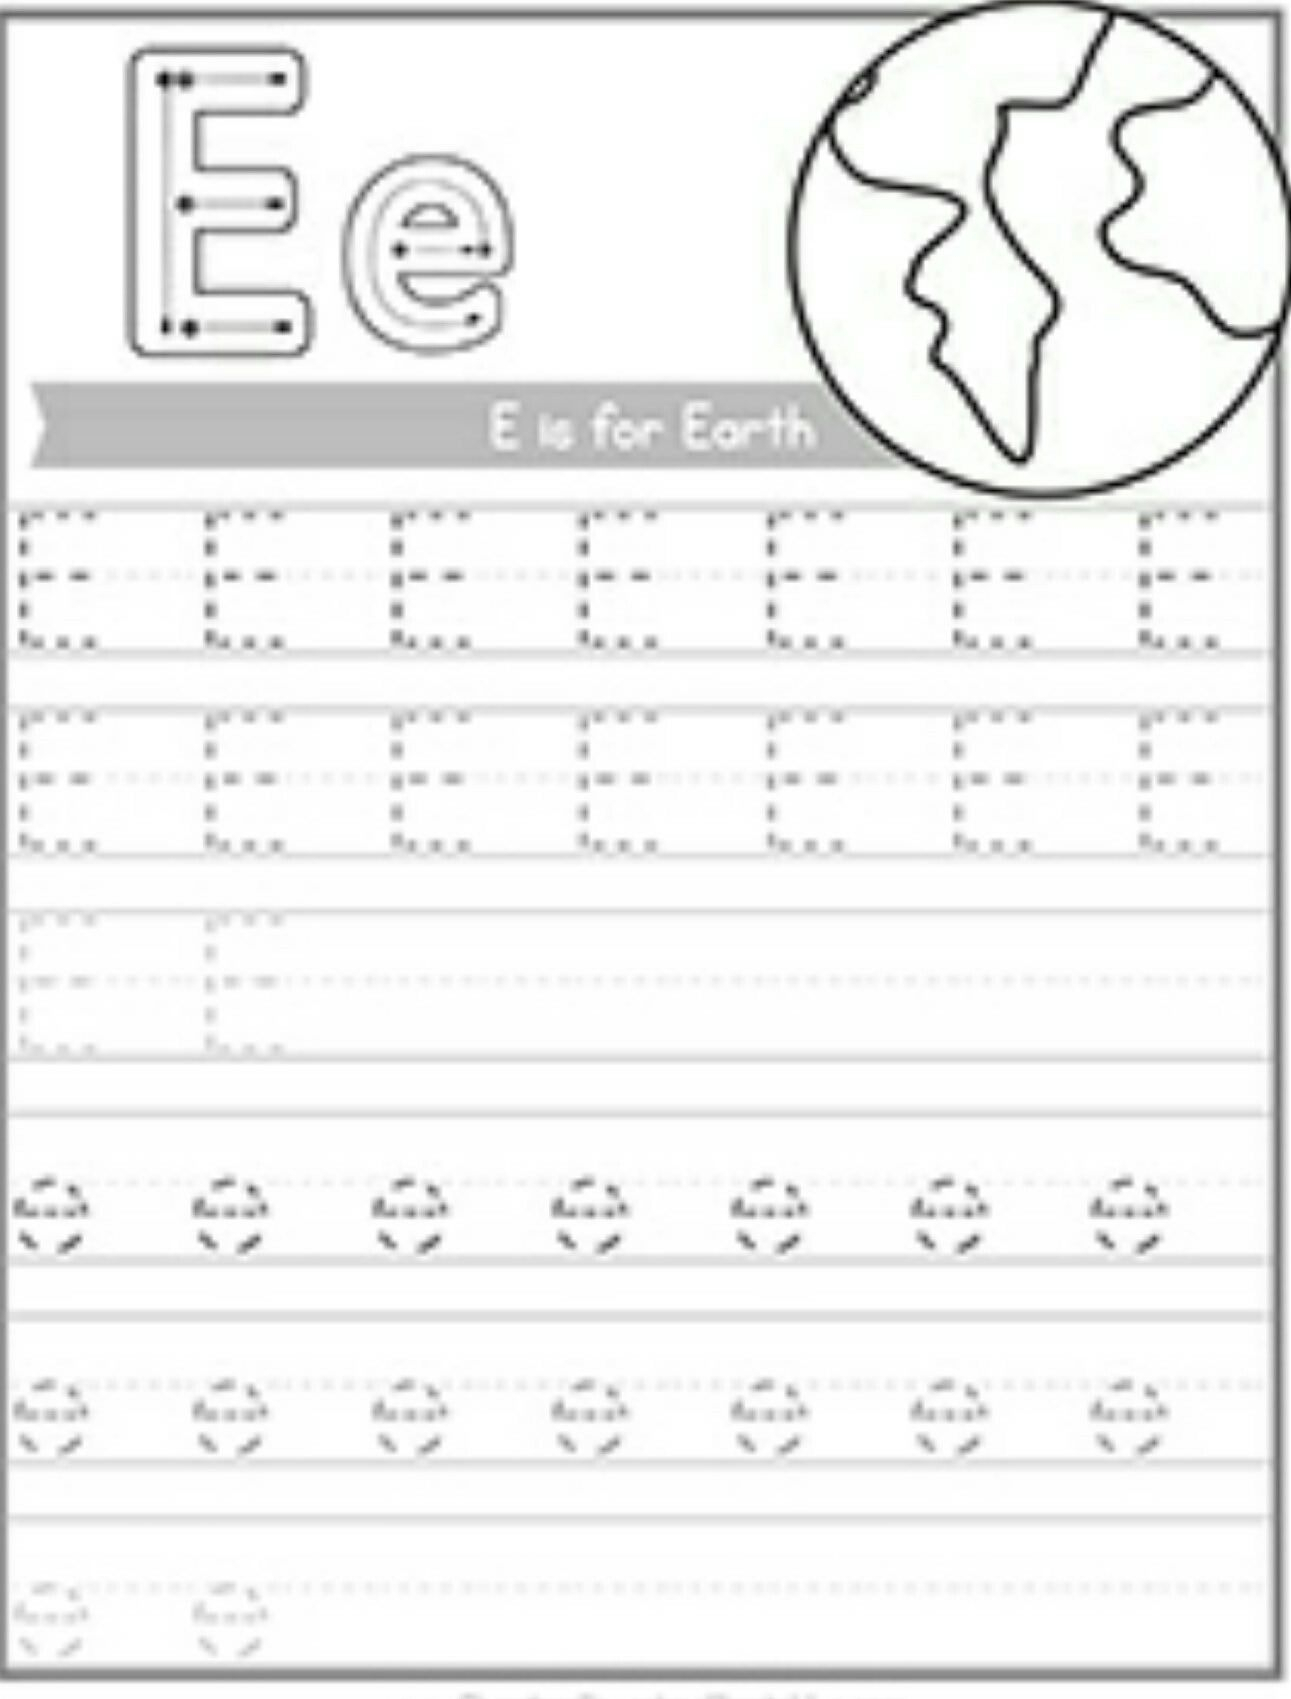 Letter Tracing E Is For Earth | Handwriting Worksheets regarding Letter E Worksheets For Pre K